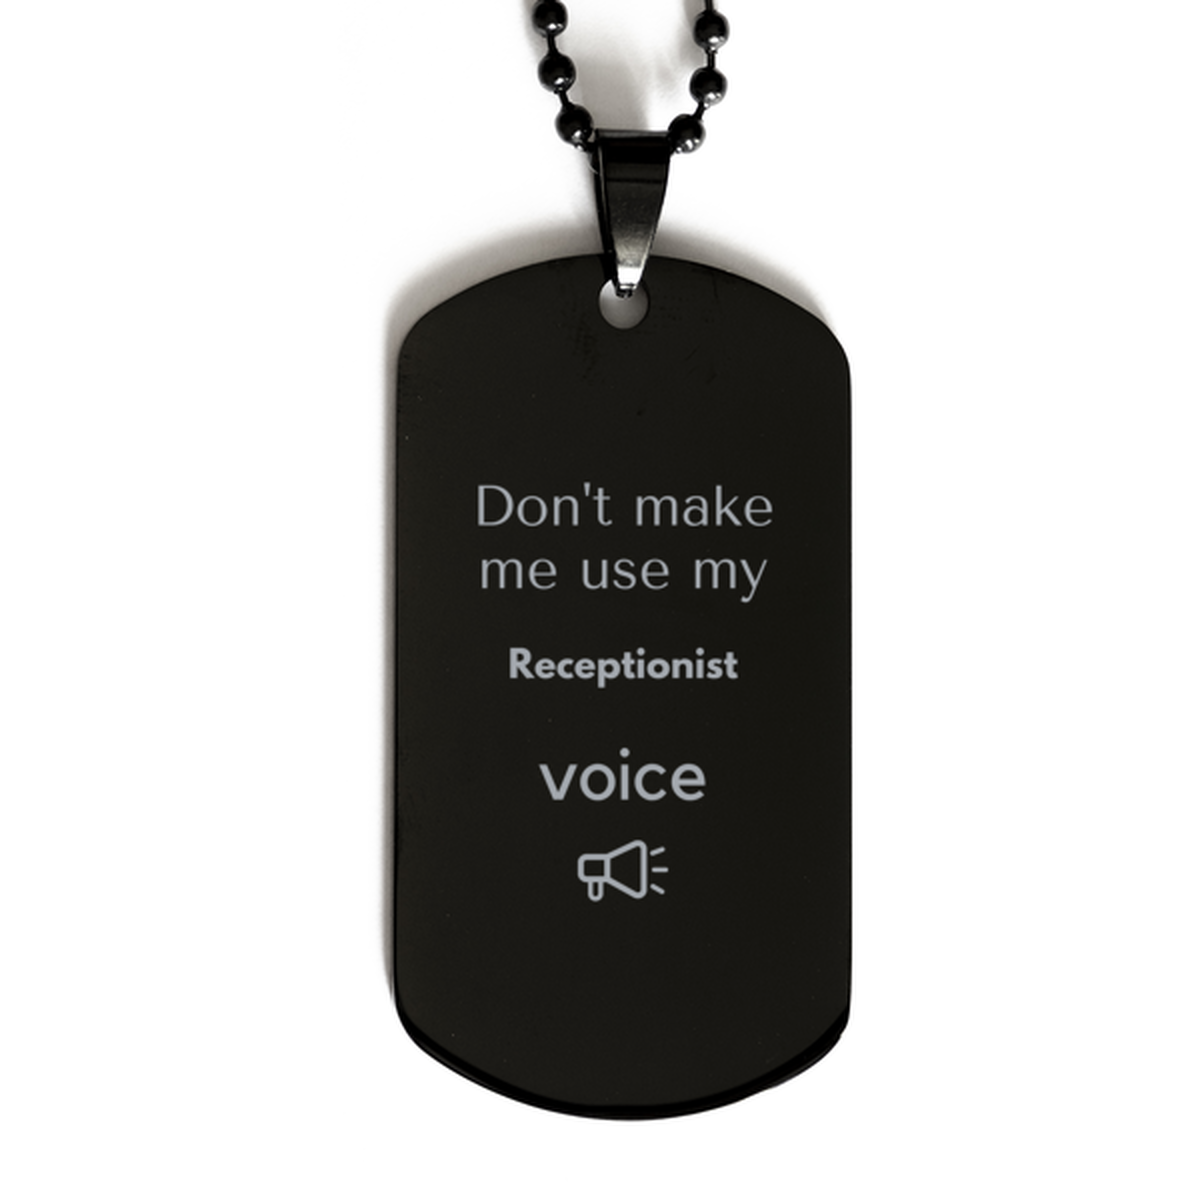 Don't make me use my Receptionist voice, Sarcasm Receptionist Gifts, Christmas Receptionist Black Dog Tag Birthday Unique Gifts For Receptionist Coworkers, Men, Women, Colleague, Friends